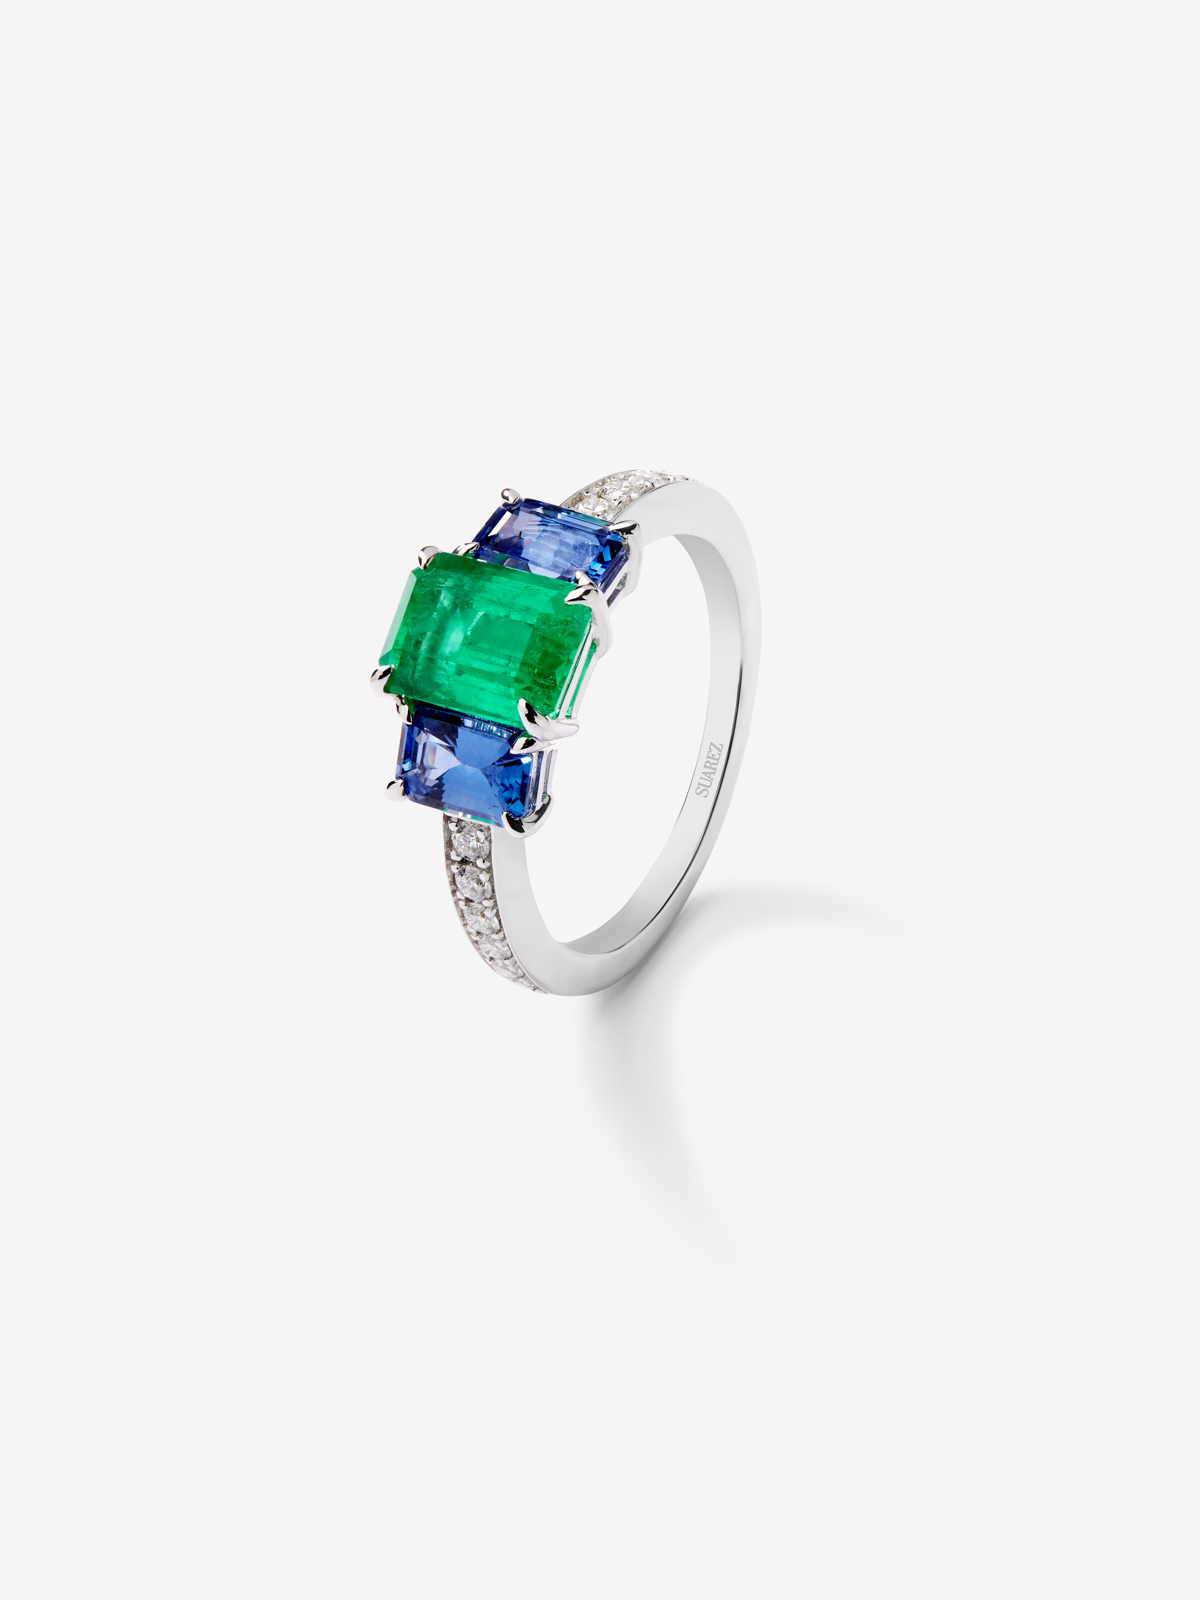 18K White Gold Tieillo Ring with Green Esmerald in Octagonal Size 1.58 CTS, Blue Sapphires in Octagonal Size 1.28 CTS and White Diamonds in Bright Size of 0.2 Cts